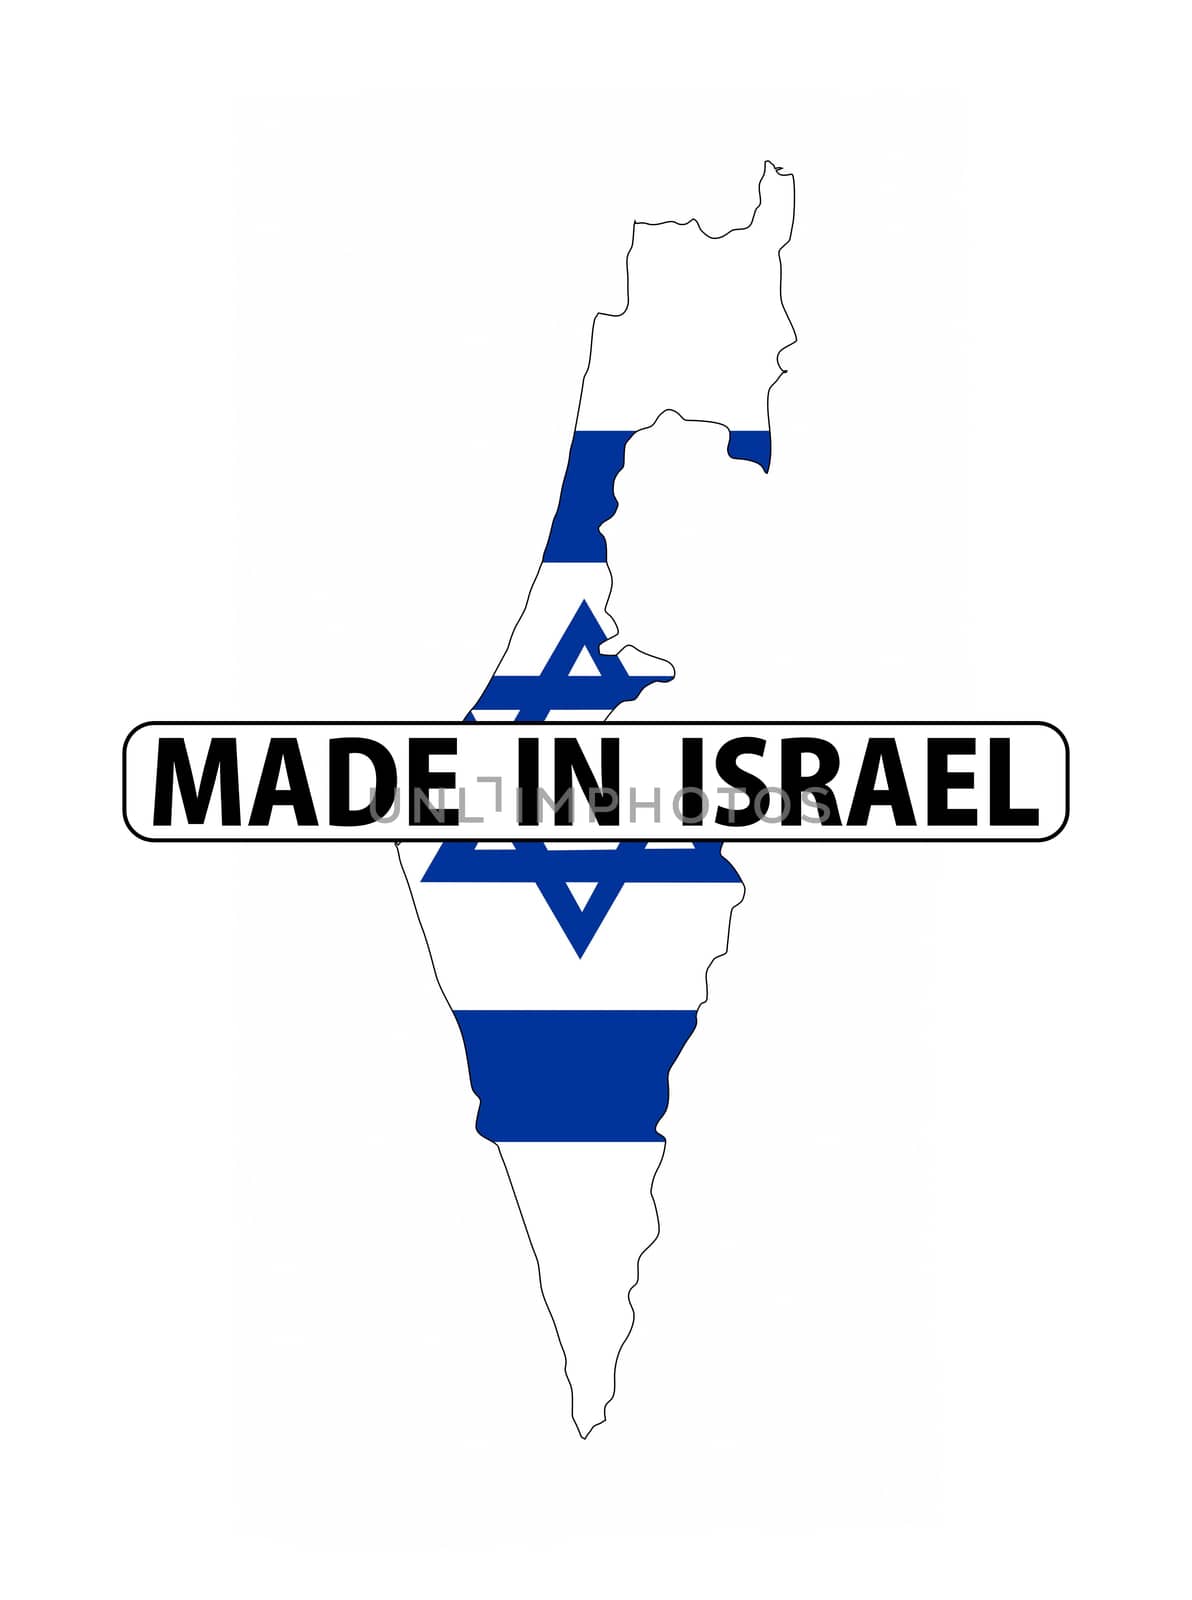 made in israel by tony4urban